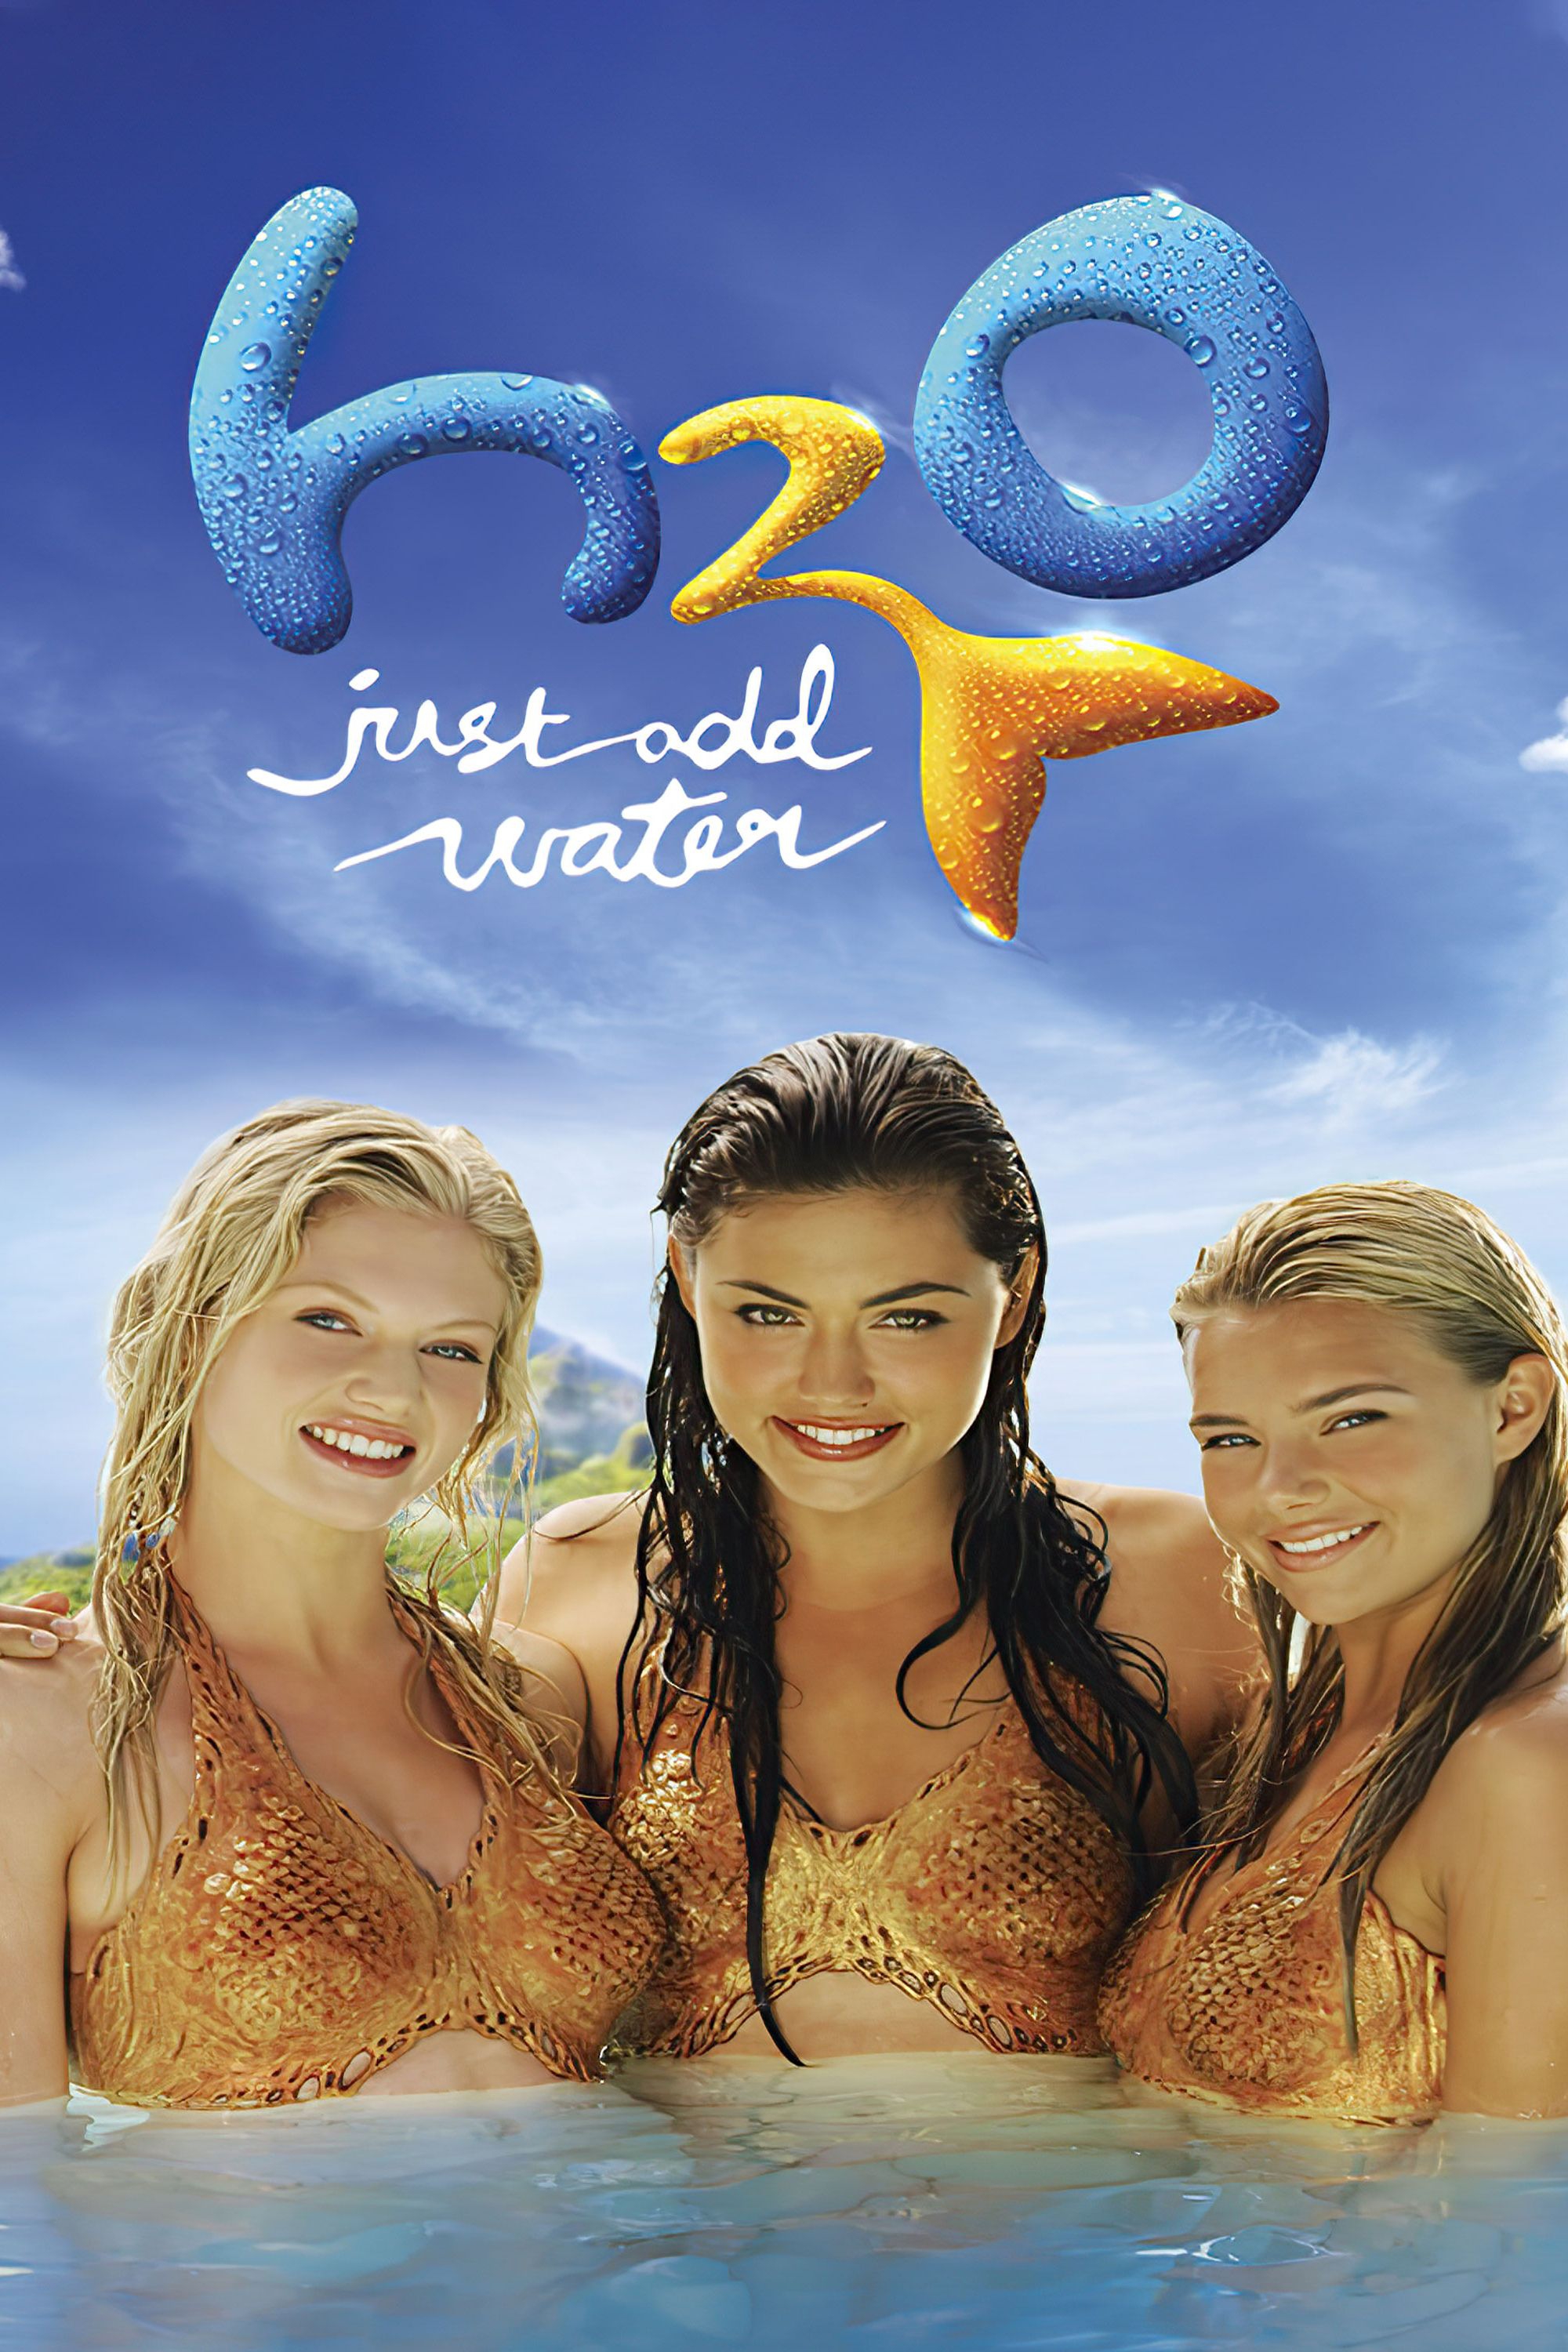 H2o just add water season 3 episodes streaming online for H2o just add water season 4 episode 1 full episode